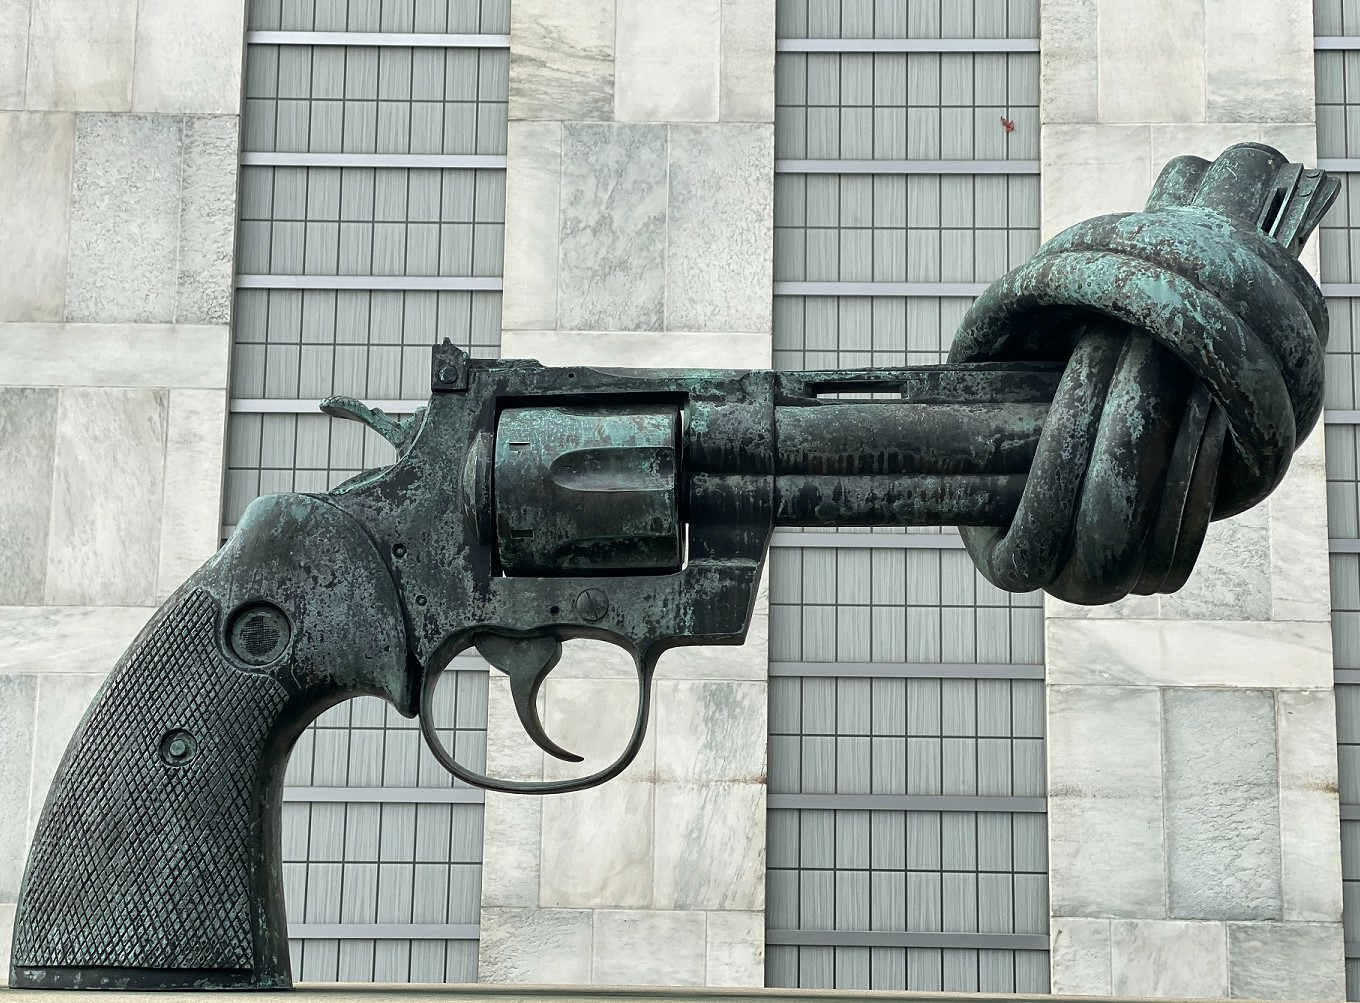 sculpture of a revolver with a twisted barrel